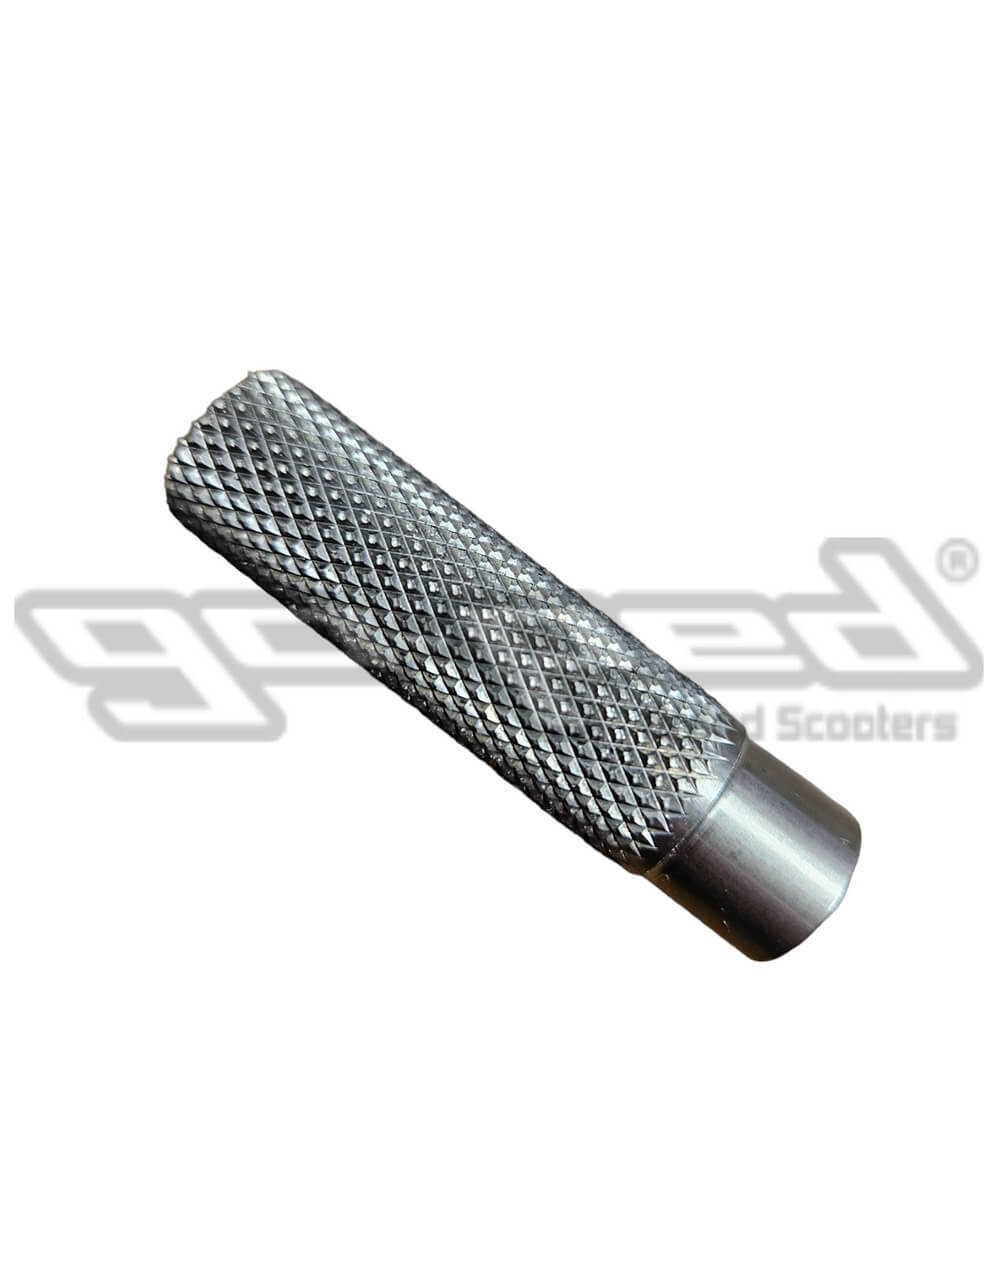 Go-Ped Replacement SPINDLE (1013SL) for ADA Third Bearing Centrifugal Clutch Combination